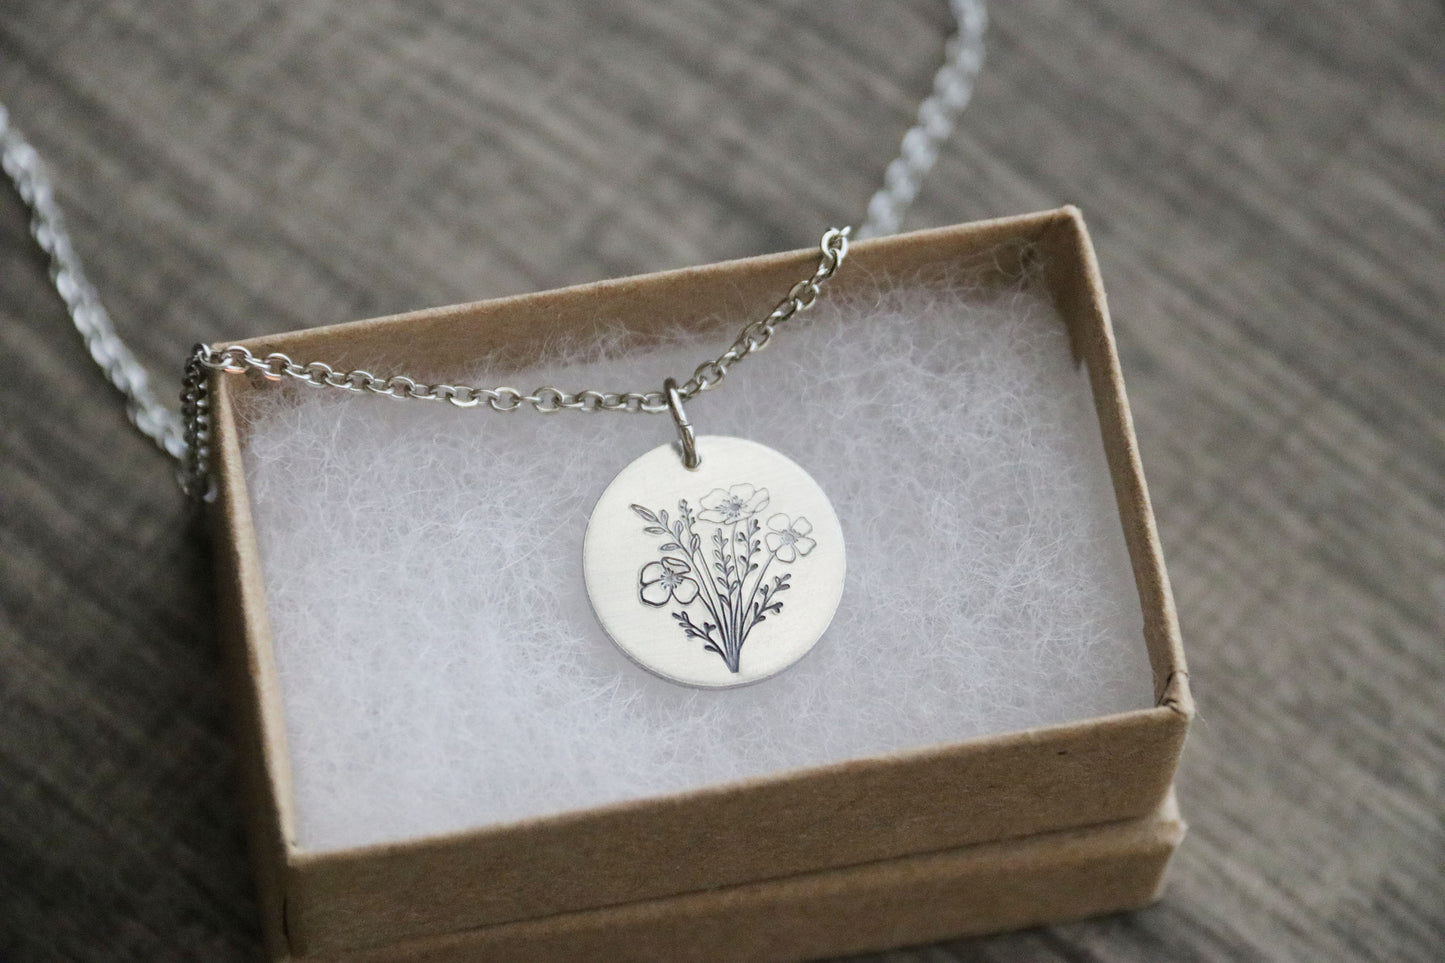 Poppy Necklace Hand Stamped, Personalized Optional